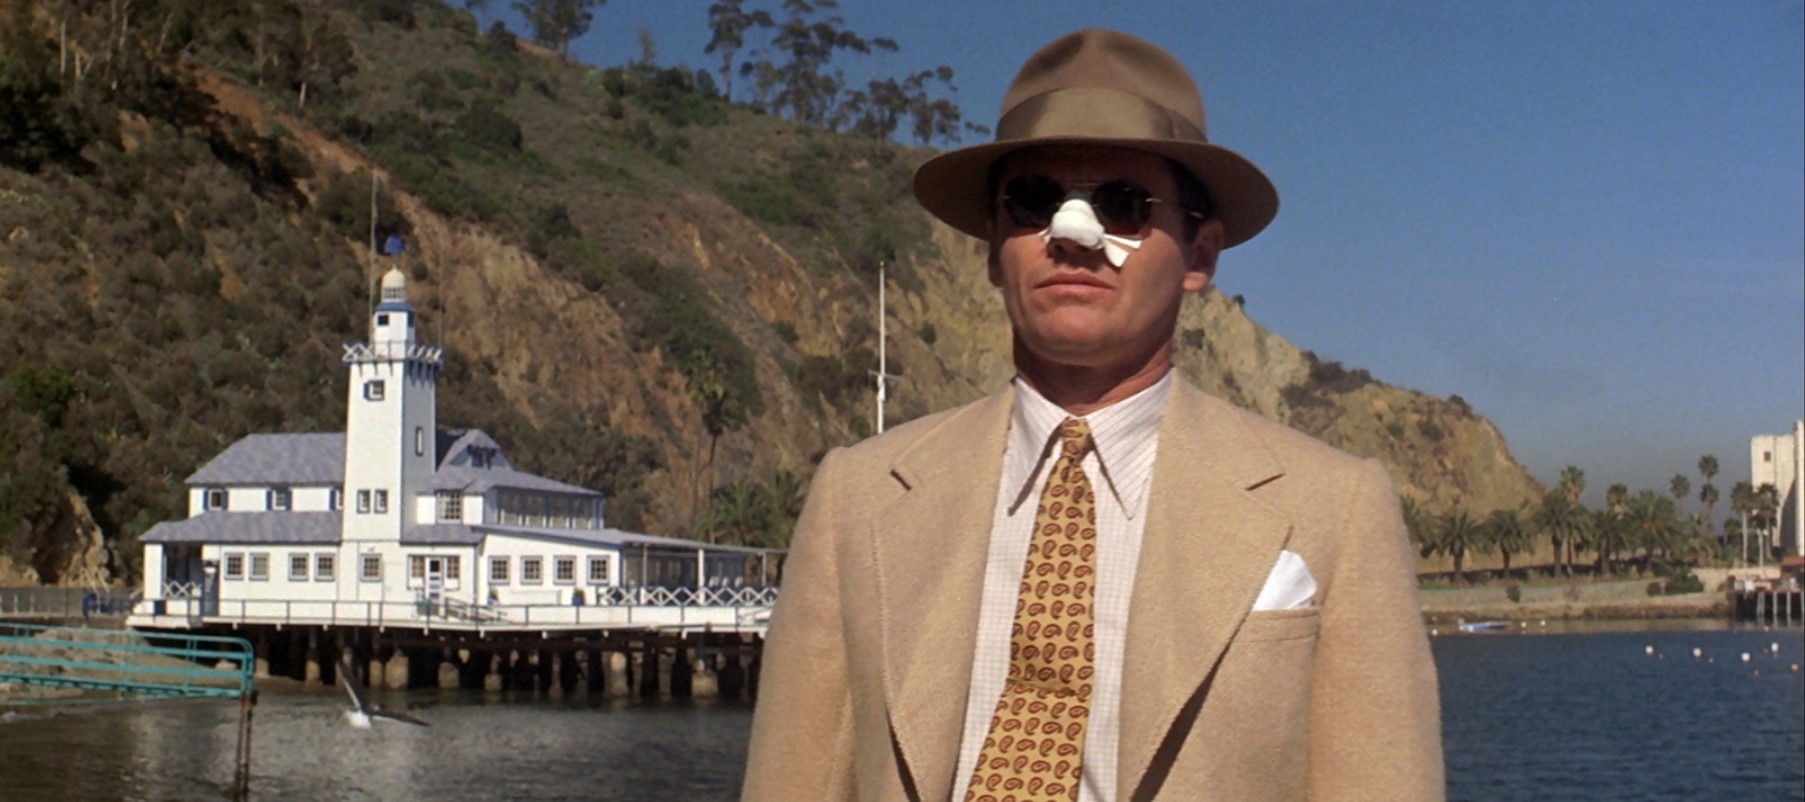 Jack Nicholson standing on a dock in the movie Chinatown (1974)